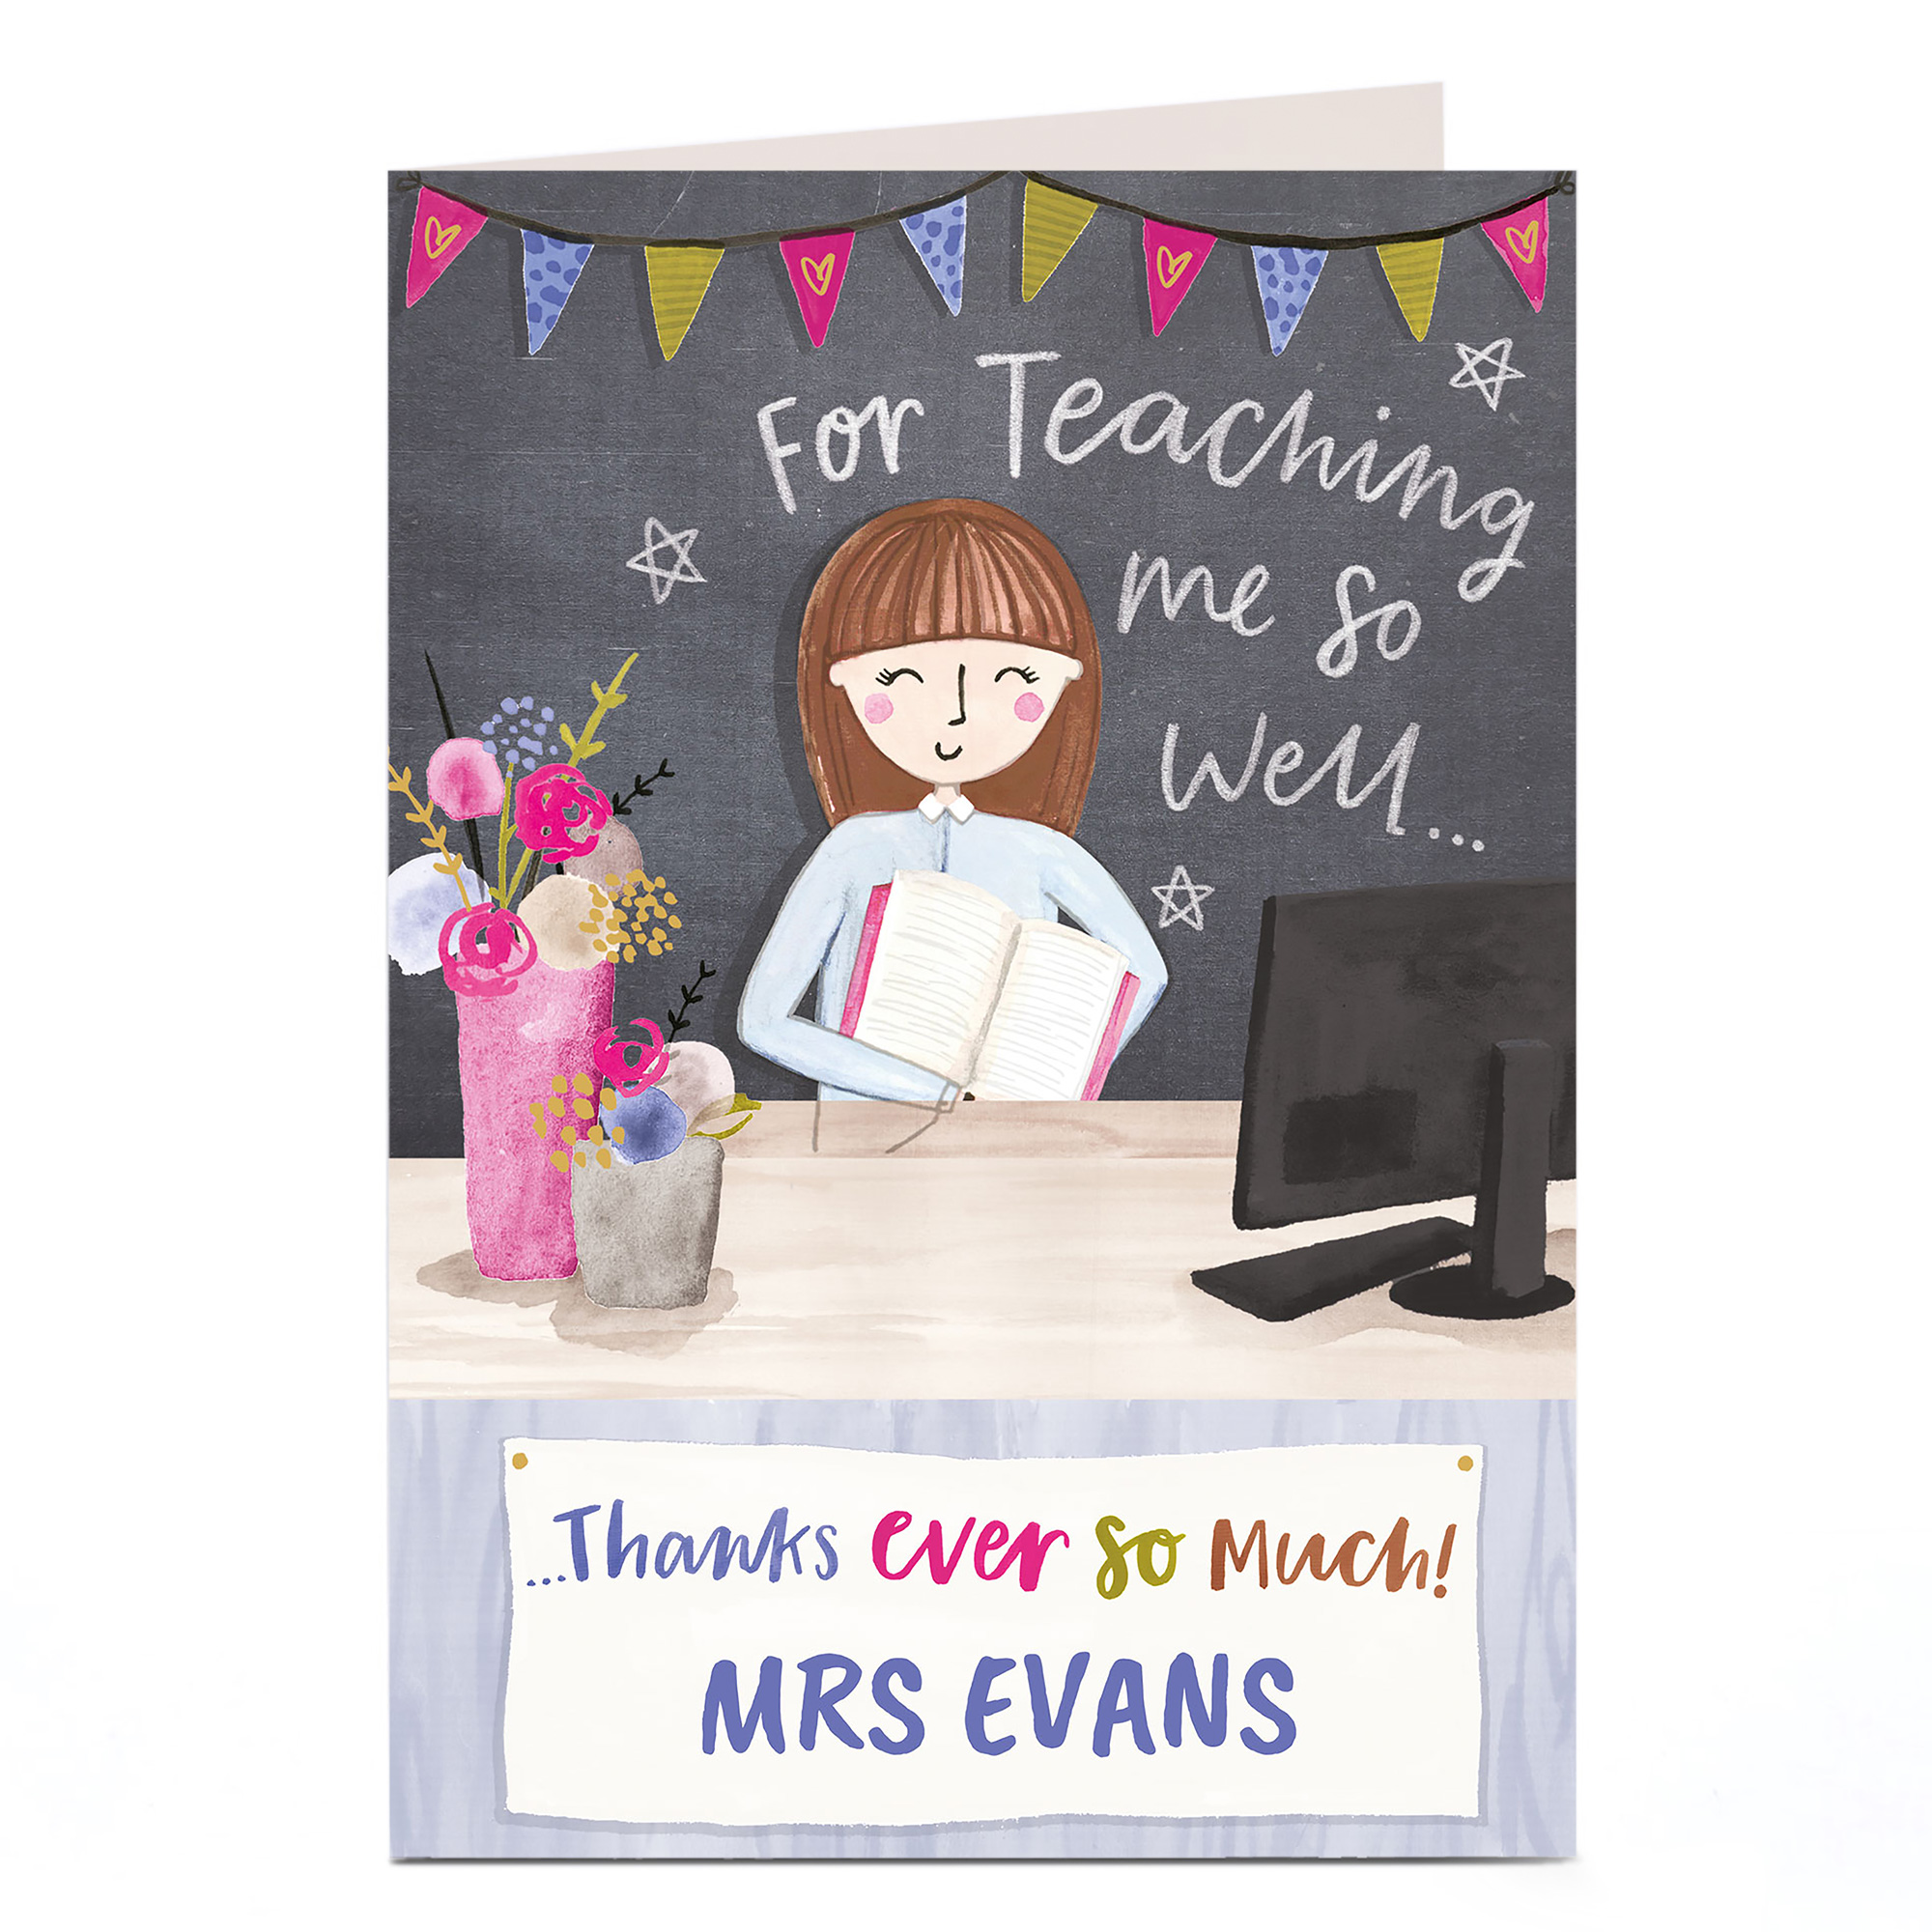 Personalised Thank You Teacher Card - For Teaching Me So Well